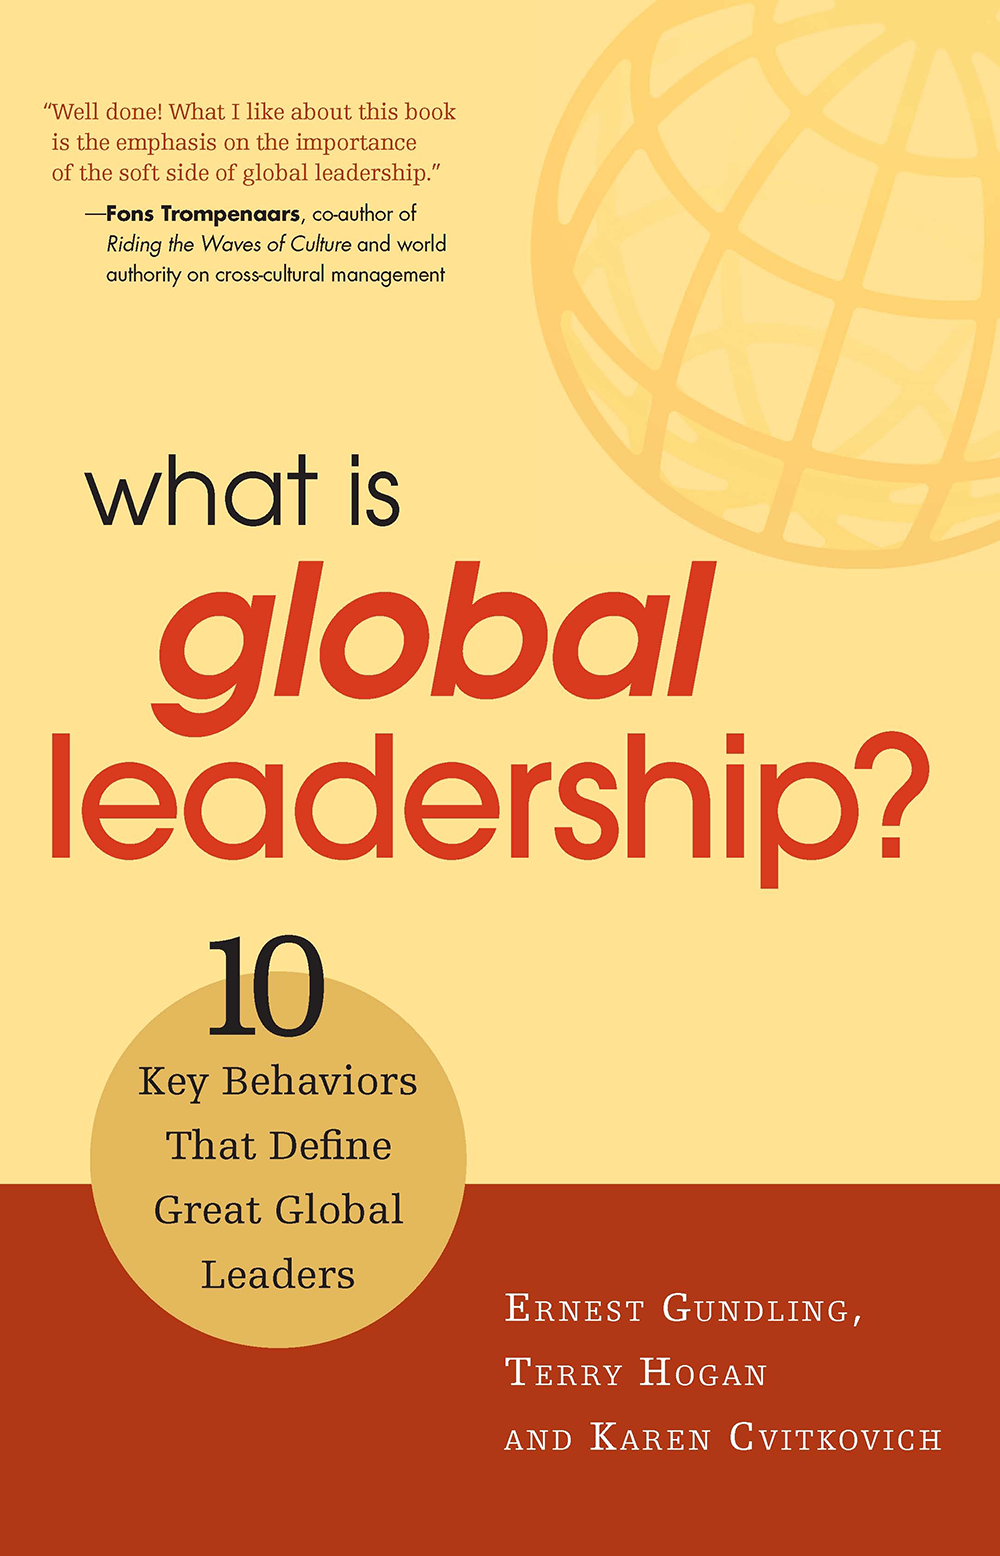 research papers on global leadership